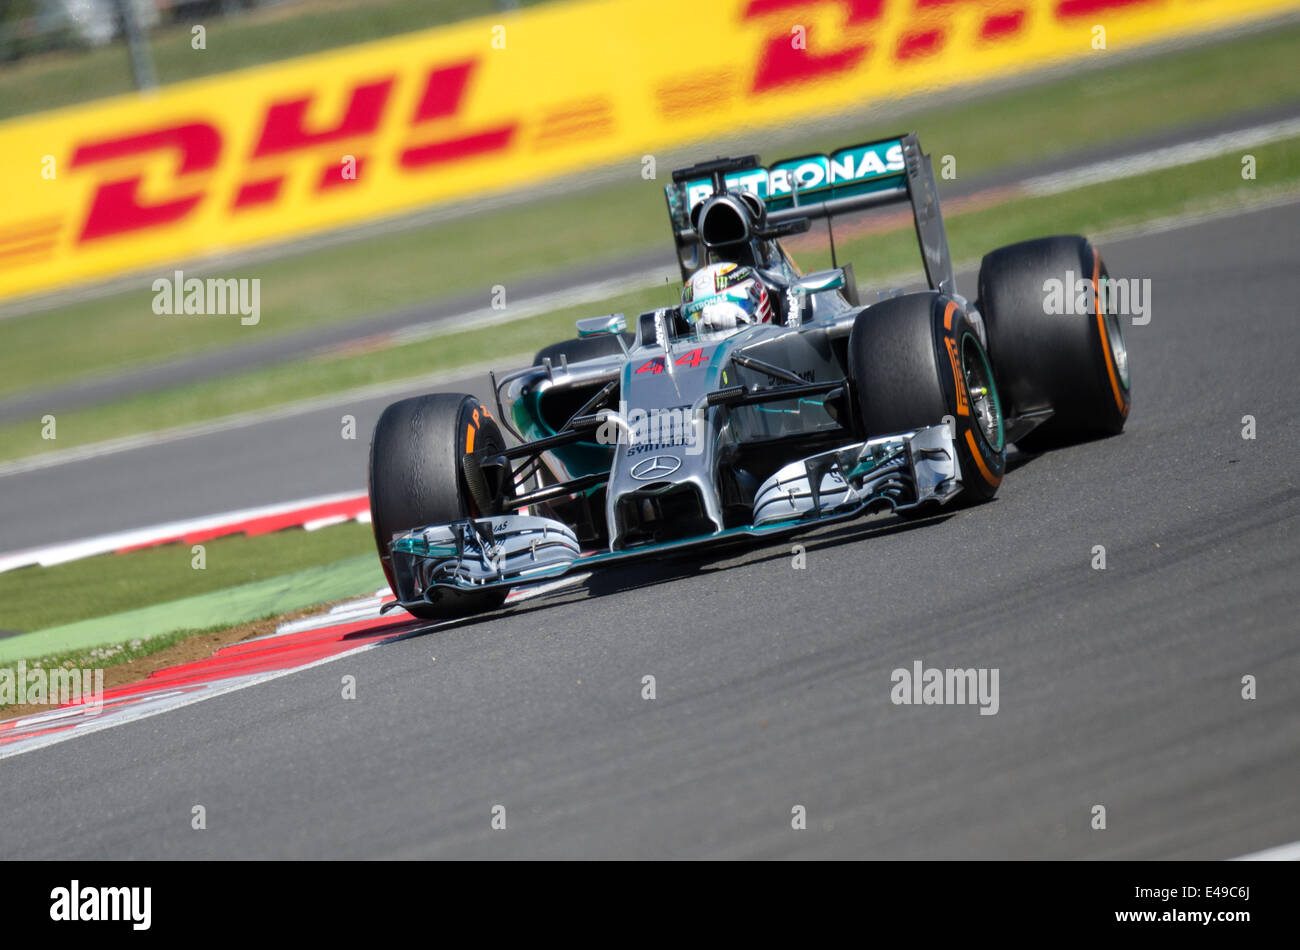 Silverstone, UK. 06th July, 2014. Lewis Hamilton (GBR), Mercedes F1 team, in action at the British F1 Grand Prix, Silverstone, UK. Credit:  Kevin Bennett/Alamy Live News Stock Photo